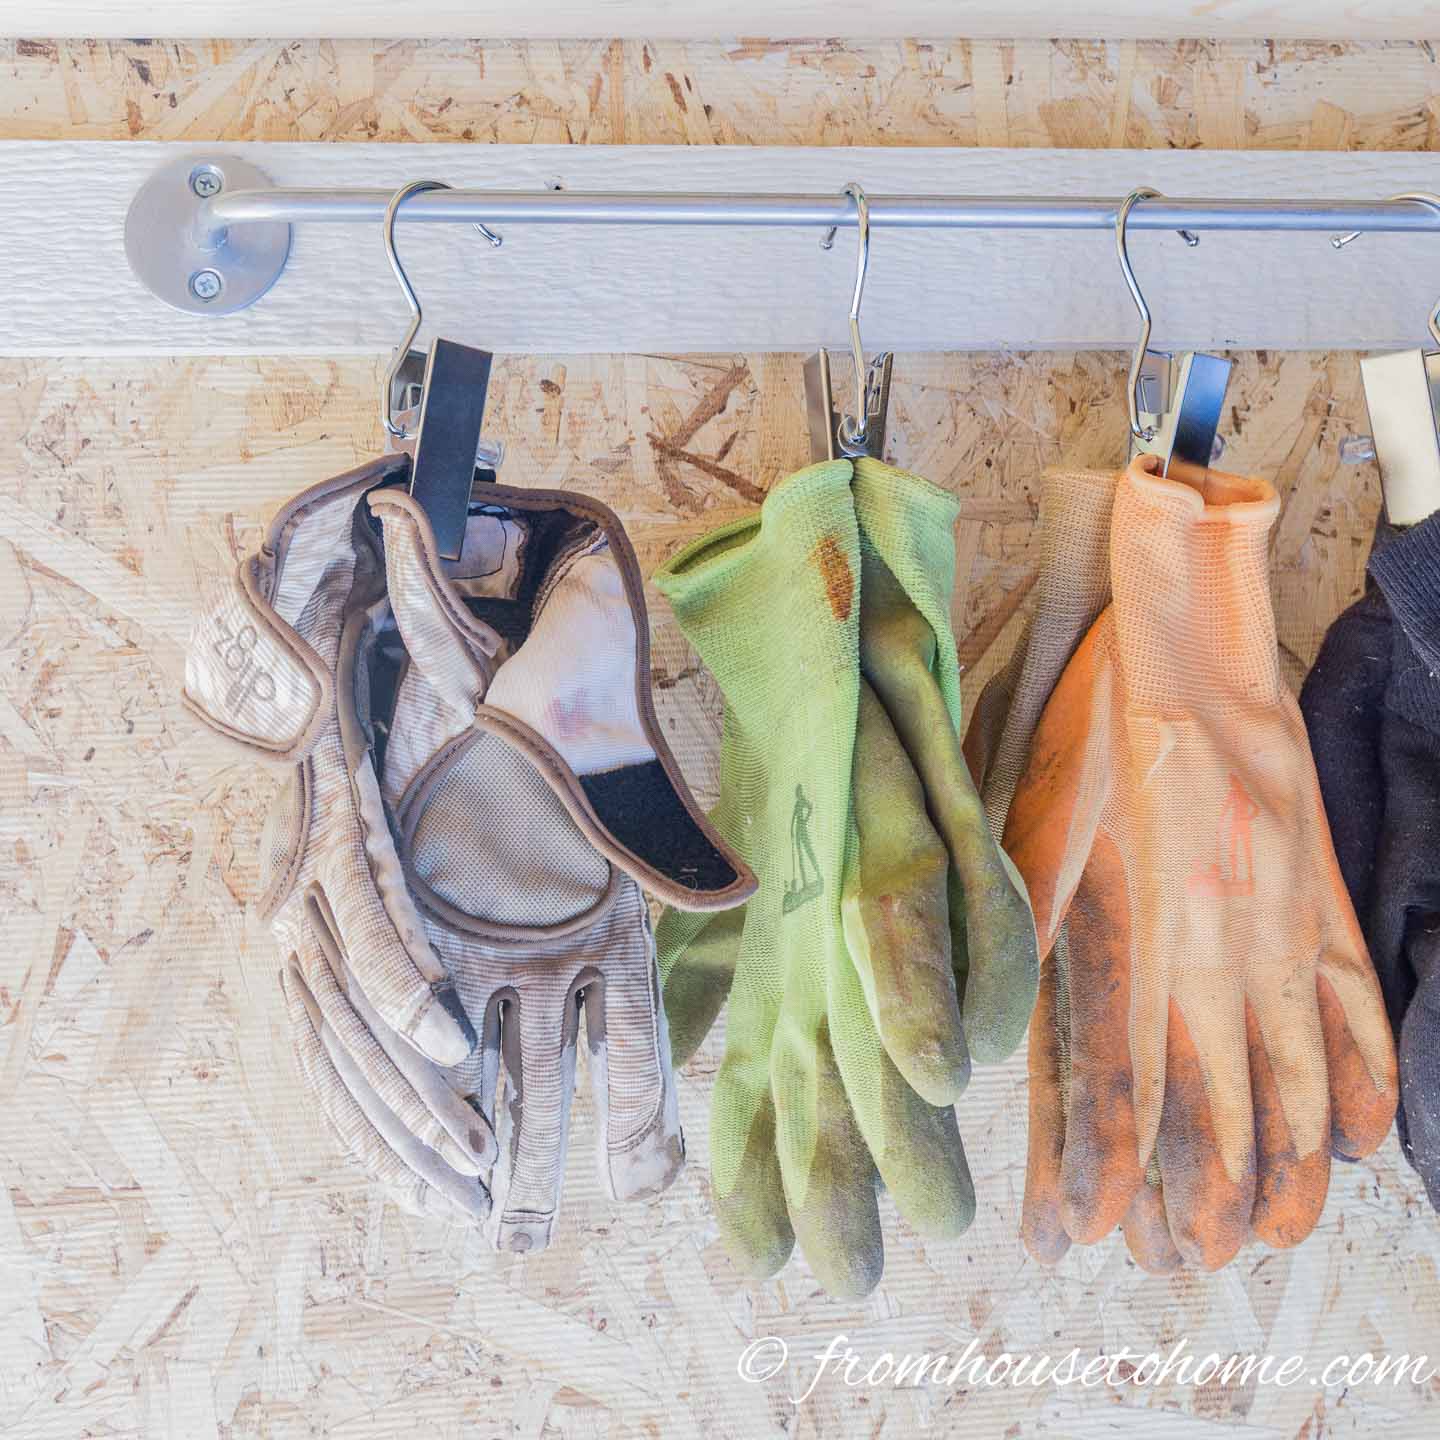 garden gloves hung from clips on a kitchen rod in a shed